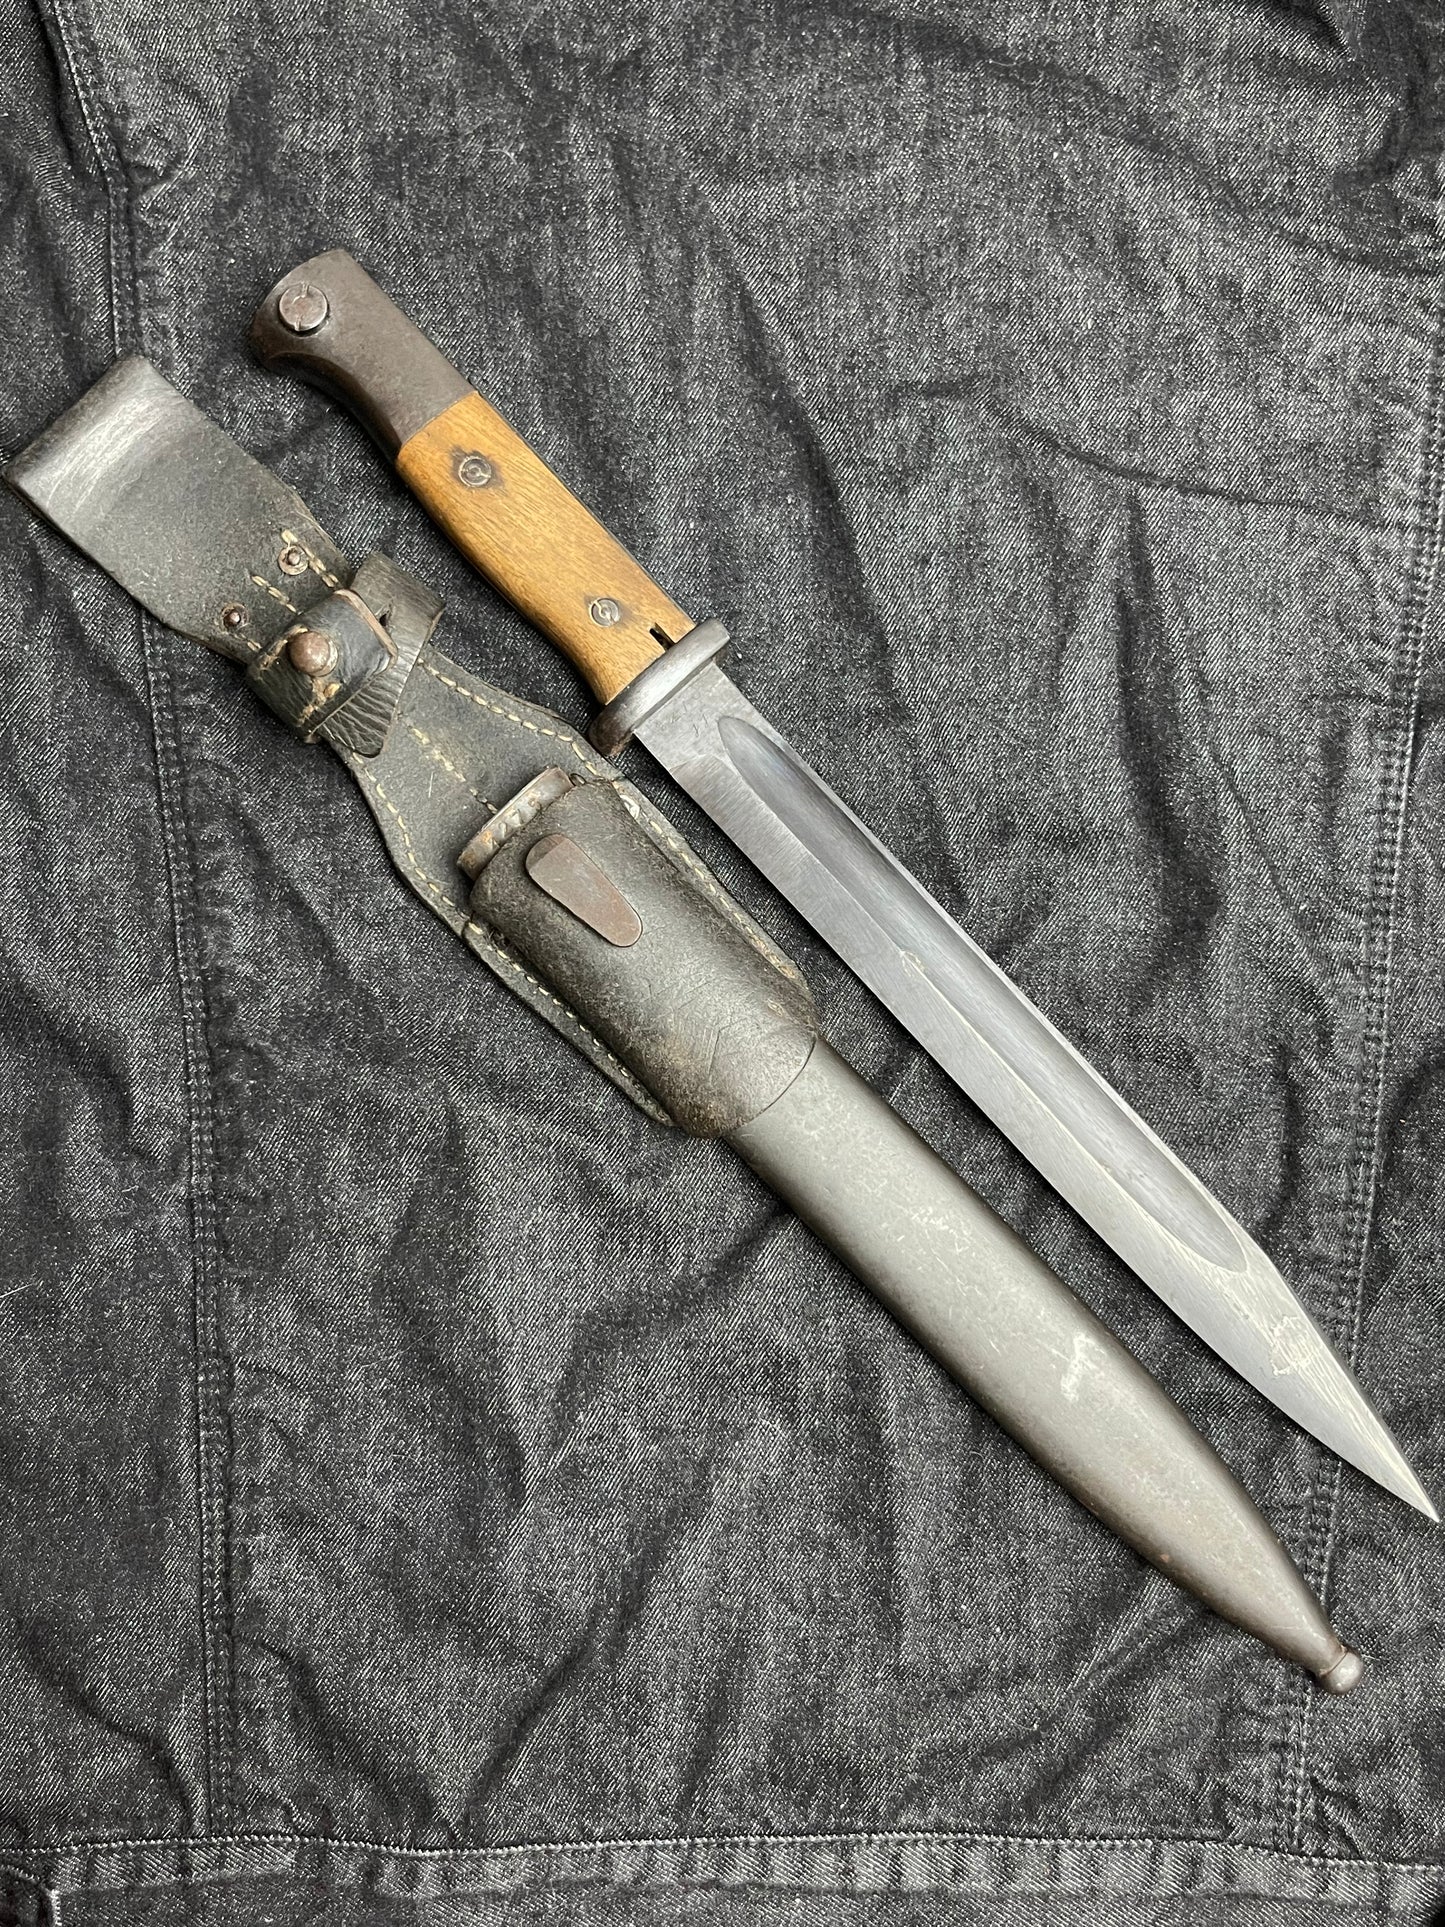 GERMAN WW2 1943 S84/98 III PATTERN MATCHING COMBAT BAYONET BY E.U.F. HORSTER W/ EARLY LEATHER FROG